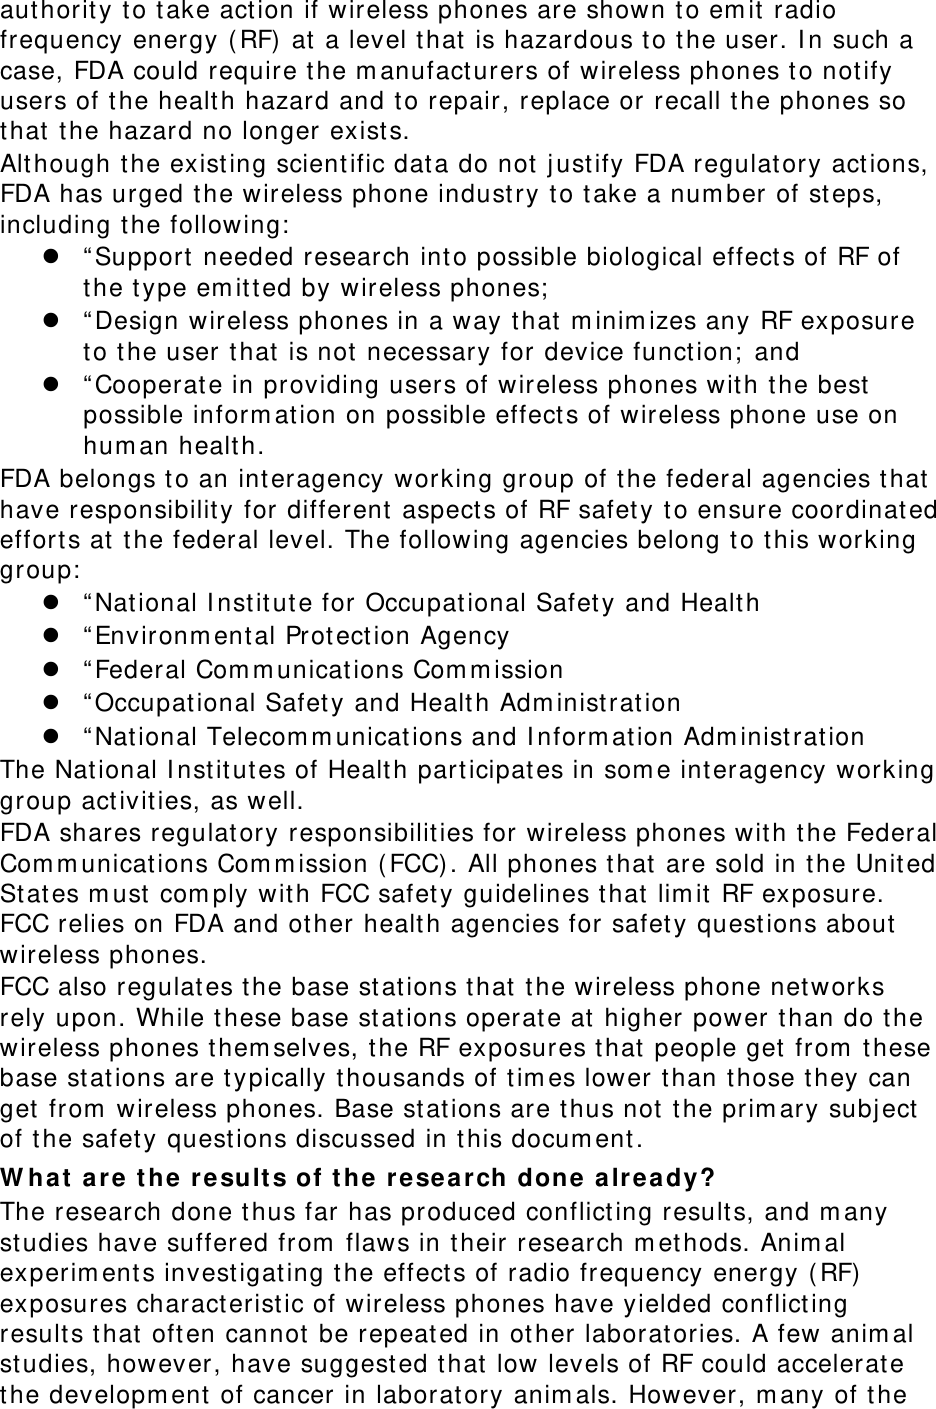 aut hority t o t ake act ion if wireless phones are shown to em it  radio frequency energy ( RF)  at a level t hat is hazardous t o t he user. I n such a case, FDA could require the m anufact urers of wireless phones to not ify users of the health hazard and to repair, replace or recall t he phones so that t he hazard no longer exist s. Alt hough the existing scientific dat a do not j ust ify FDA regulat ory act ions, FDA has urged t he wireless phone indust ry to t ake a num ber of st eps, including t he following:  z “ Support  needed research into possible biological effect s of RF of the type em it t ed by wireless phones;  z “ Design wireless phones in a way that m inim izes any RF exposure to the user t hat  is not necessary for device function;  and z “ Cooperate in providing users of wireless phones with t he best  possible inform ation on possible effect s of wireless phone use on hum an healt h. FDA belongs to an int eragency working group of t he federal agencies that have responsibilit y for different  aspects of RF safety to ensure coordinated efforts at the federal level. The following agencies belong to t his working group:  z “ National I nst itut e for Occupat ional Safety and Healt h z “ Environm ent al Protect ion Agency z “ Federal Com m unicat ions Com m ission z “ Occupat ional Safet y and Health Adm inist ration z “ National Telecom m unications and I nform ation Adm inistration The National I nst itut es of Health part icipat es in som e int eragency working group act ivities, as well. FDA shares regulat ory responsibilities for wireless phones with t he Federal Com m unicat ions Com m ission ( FCC). All phones t hat are sold in t he United St ates m ust com ply with FCC safet y guidelines that lim it  RF exposure. FCC relies on FDA and other health agencies for safet y quest ions about  wireless phones. FCC also regulat es the base stat ions t hat t he wireless phone networks rely upon. While t hese base st at ions operat e at  higher power t han do the wireless phones them selves, t he RF exposures that people get  from  t hese base stat ions are typically thousands of tim es lower than those t hey can get  from  wireless phones. Base st ations are t hus not the prim ary subj ect  of t he safet y quest ions discussed in this docum ent . W hat  are  t he r esult s of t he r esear ch done a lr eady? The research done thus far has produced conflict ing result s, and m any studies have suffered from  flaws in t heir research m et hods. Anim al experim ents invest igat ing t he effect s of radio frequency energy ( RF)  exposures charact eristic of wireless phones have yielded conflict ing results t hat often cannot be repeat ed in other laboratories. A few anim al studies, however, have suggest ed t hat low levels of RF could accelerate the developm ent  of cancer in laborat ory anim als. However, m any of the 